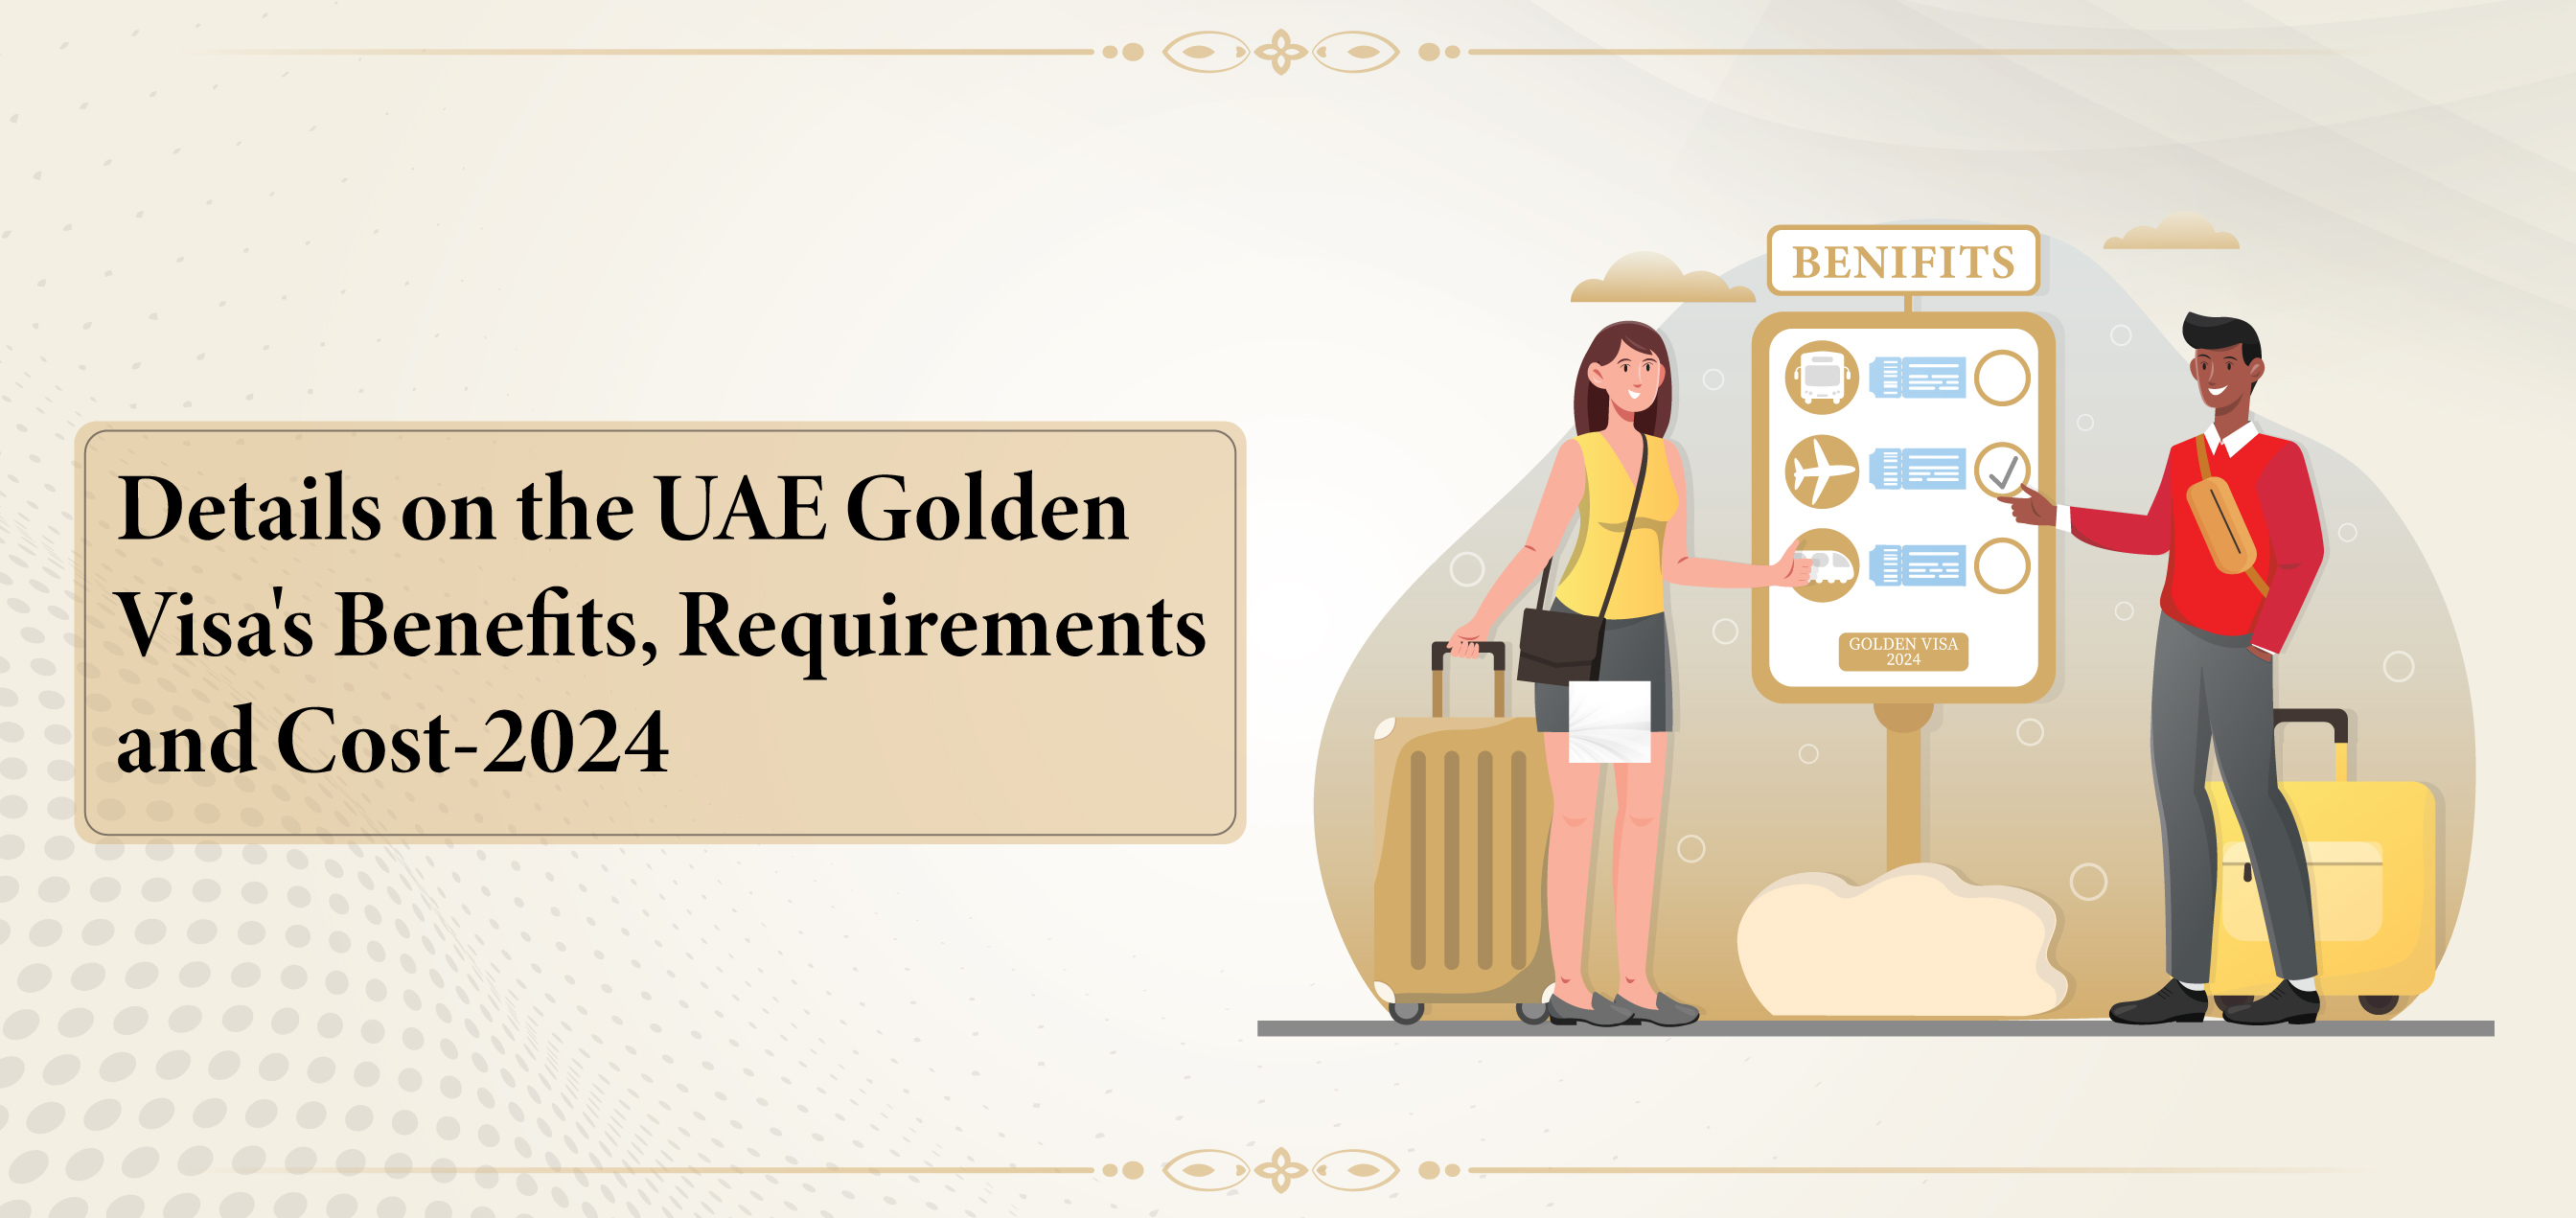 Details on the UAE Golden Visa's Benefits, Requirements and Cost-2024